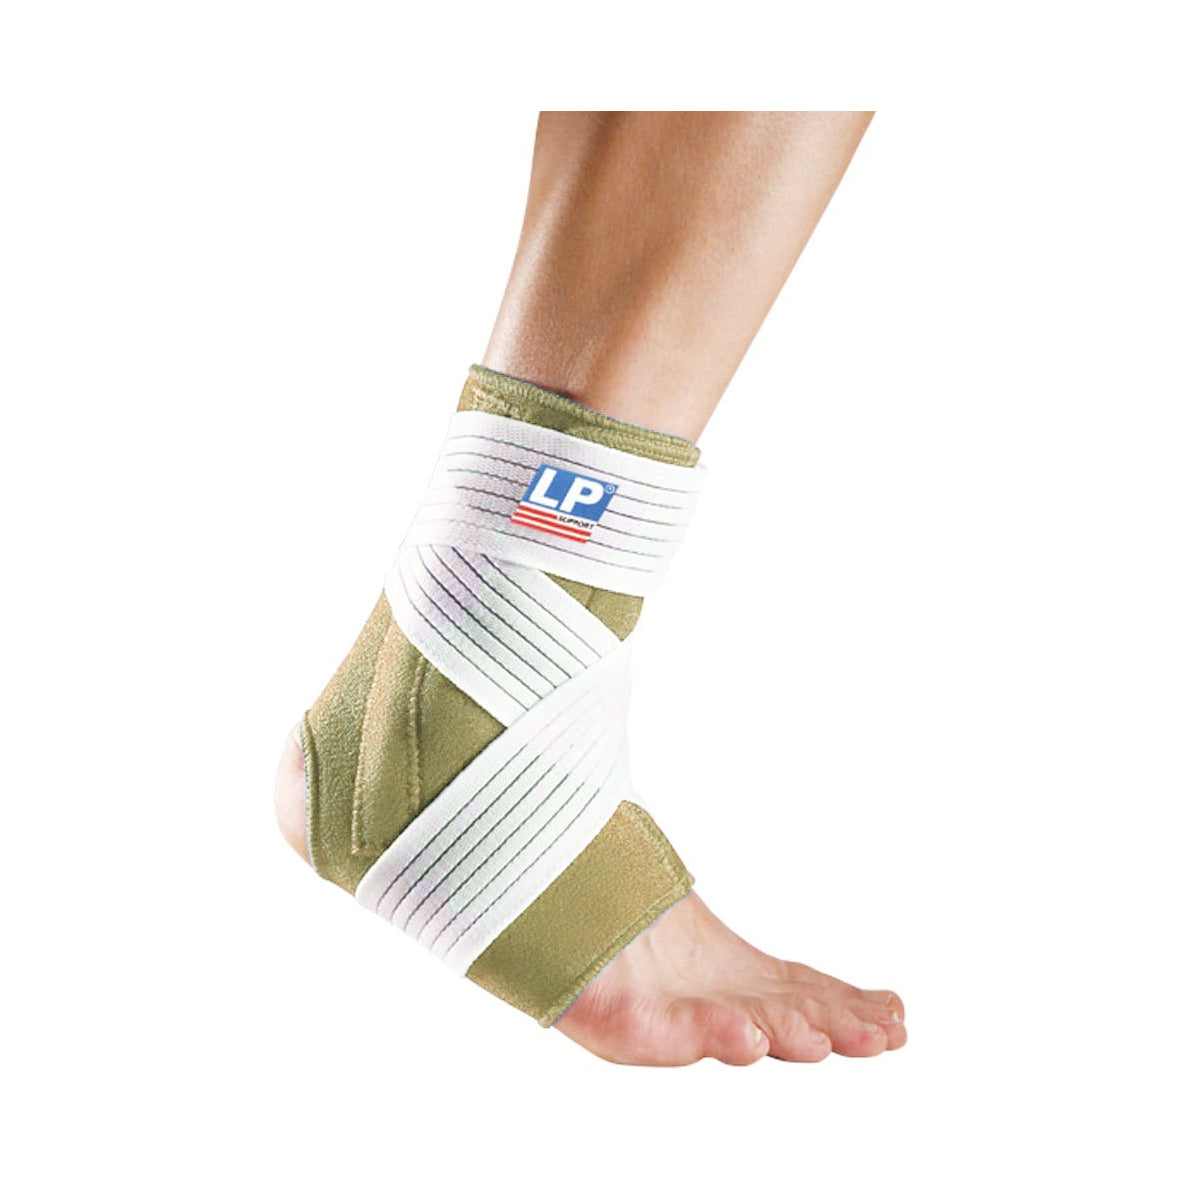 LP SUPPORT (WITH STAY AND STRAP) 775-TAN ANKLE SUPPORT